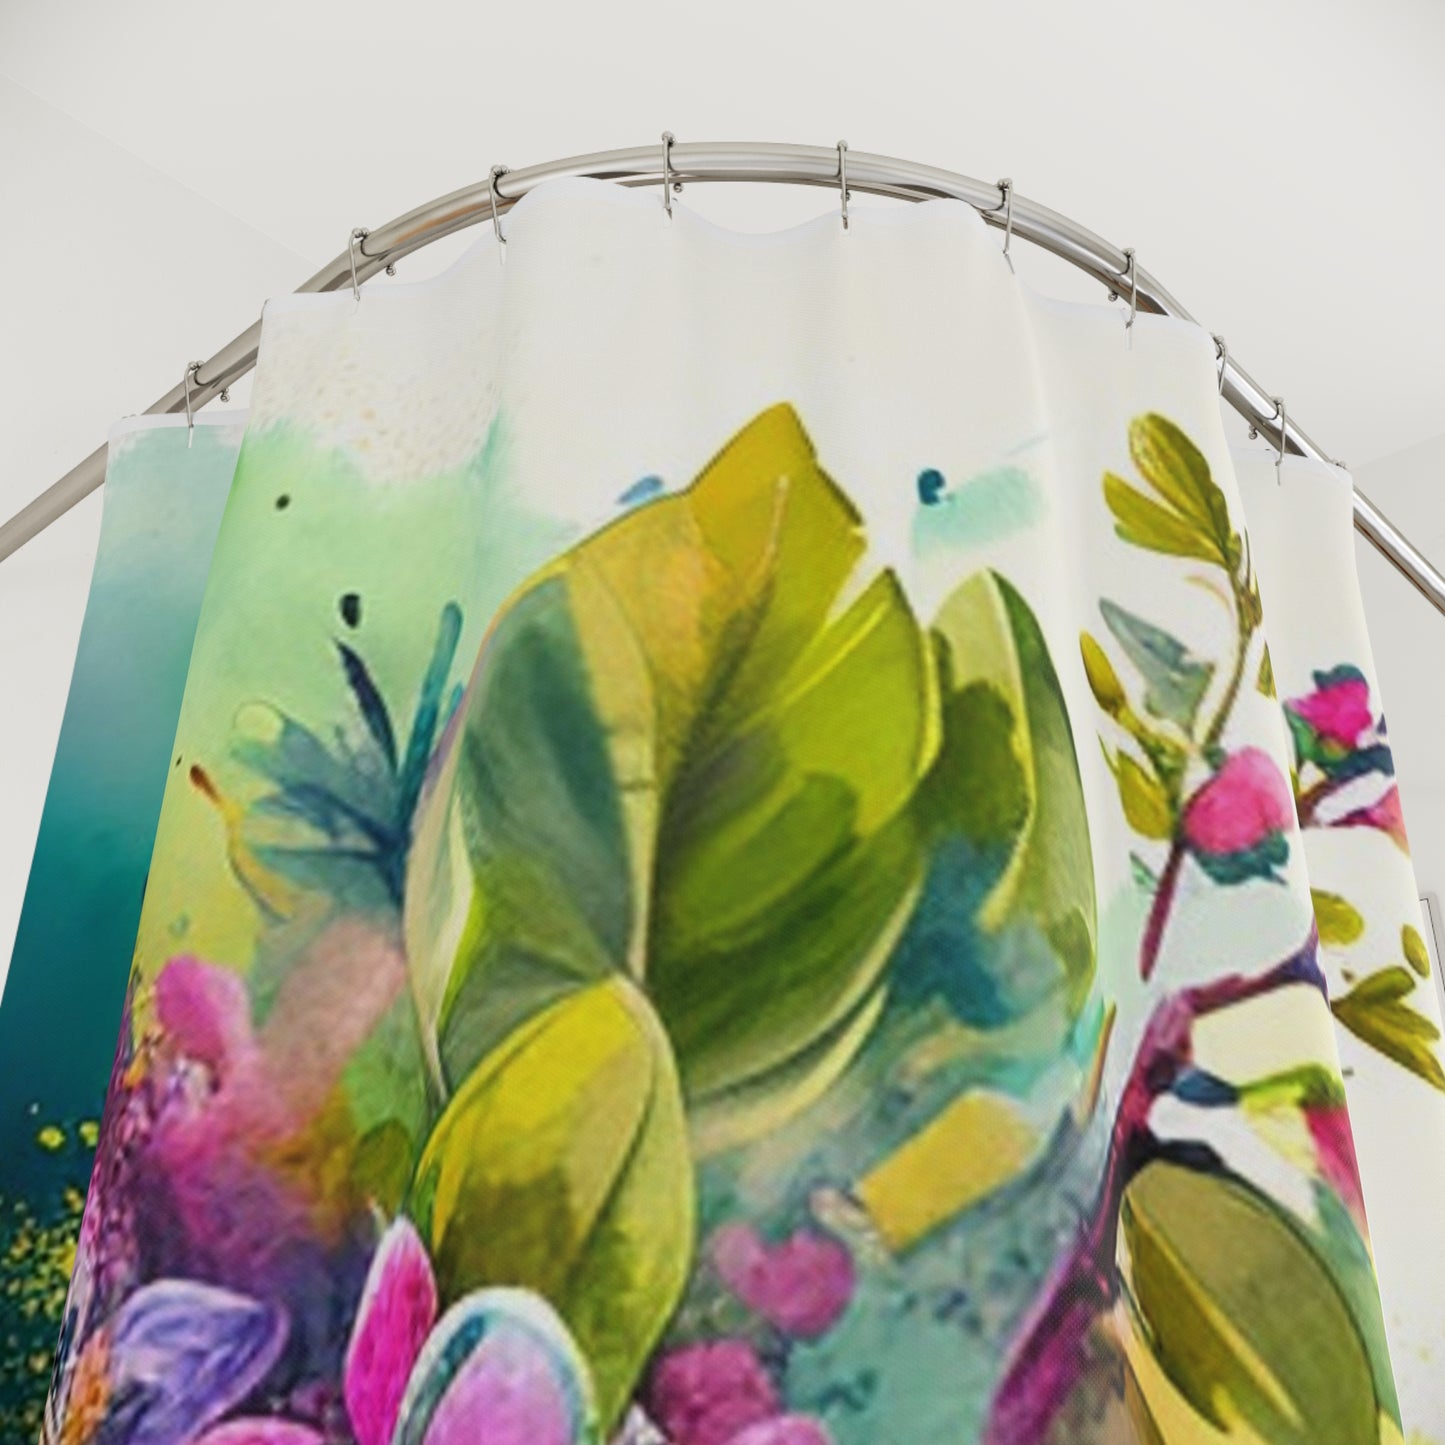 Polyester Shower Curtain Mother Nature Bright Spring Colors Realistic Watercolor 1